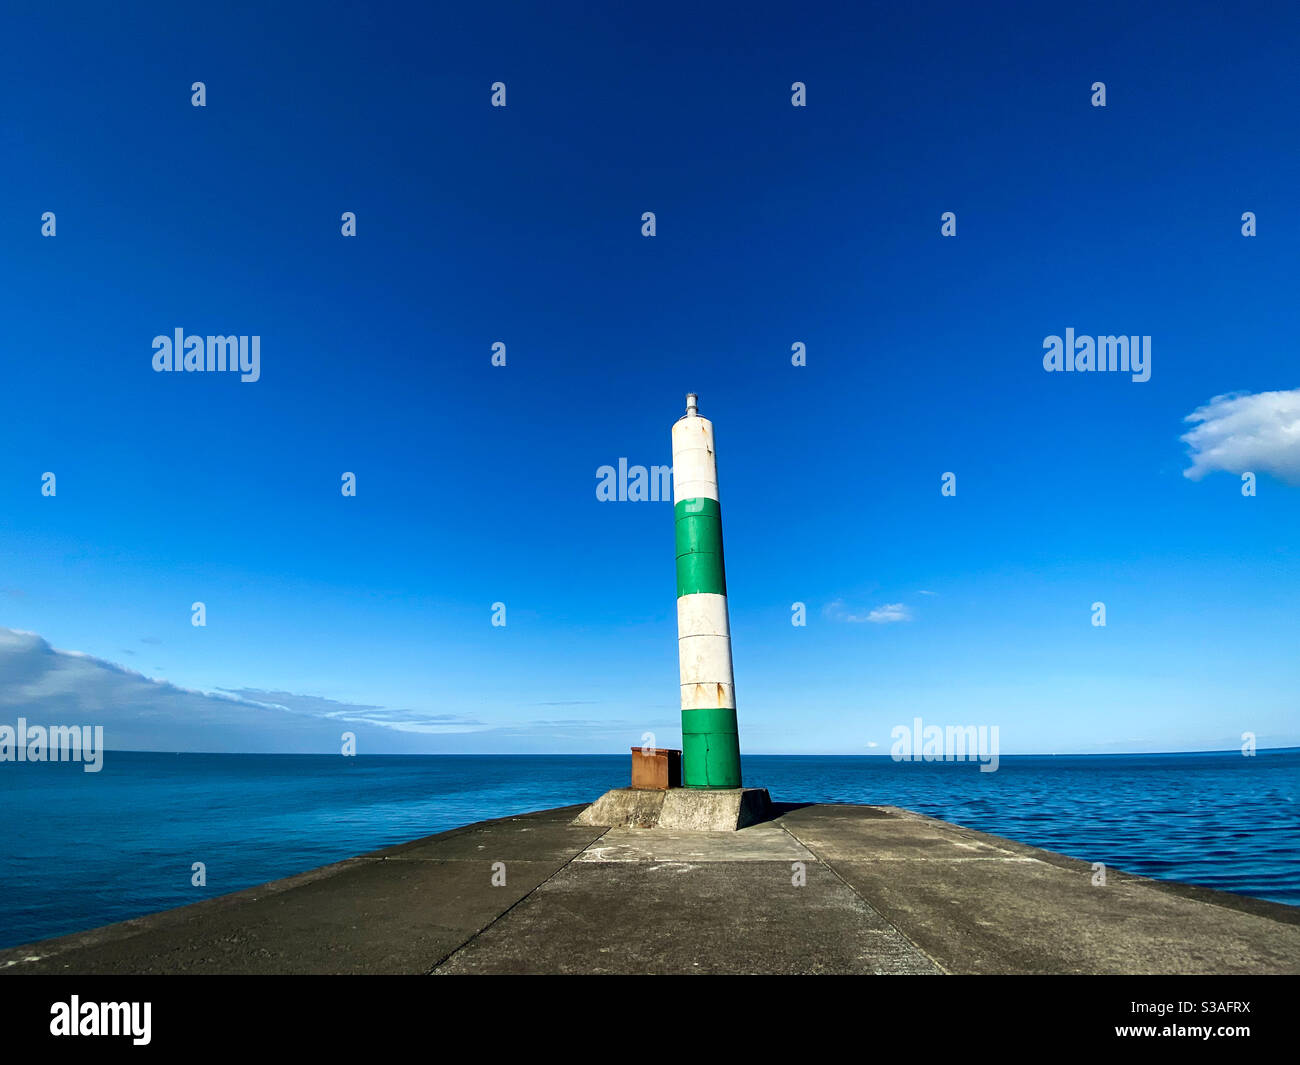 Aberystwyth, West Wales, UK. Saturday 17th October 2020. Weather: A very sunny and warm day in Aberystwyth by the stunning sea and lighthouse. Photo Credit ©️Rose Voon / Alamy Live News. Stock Photo